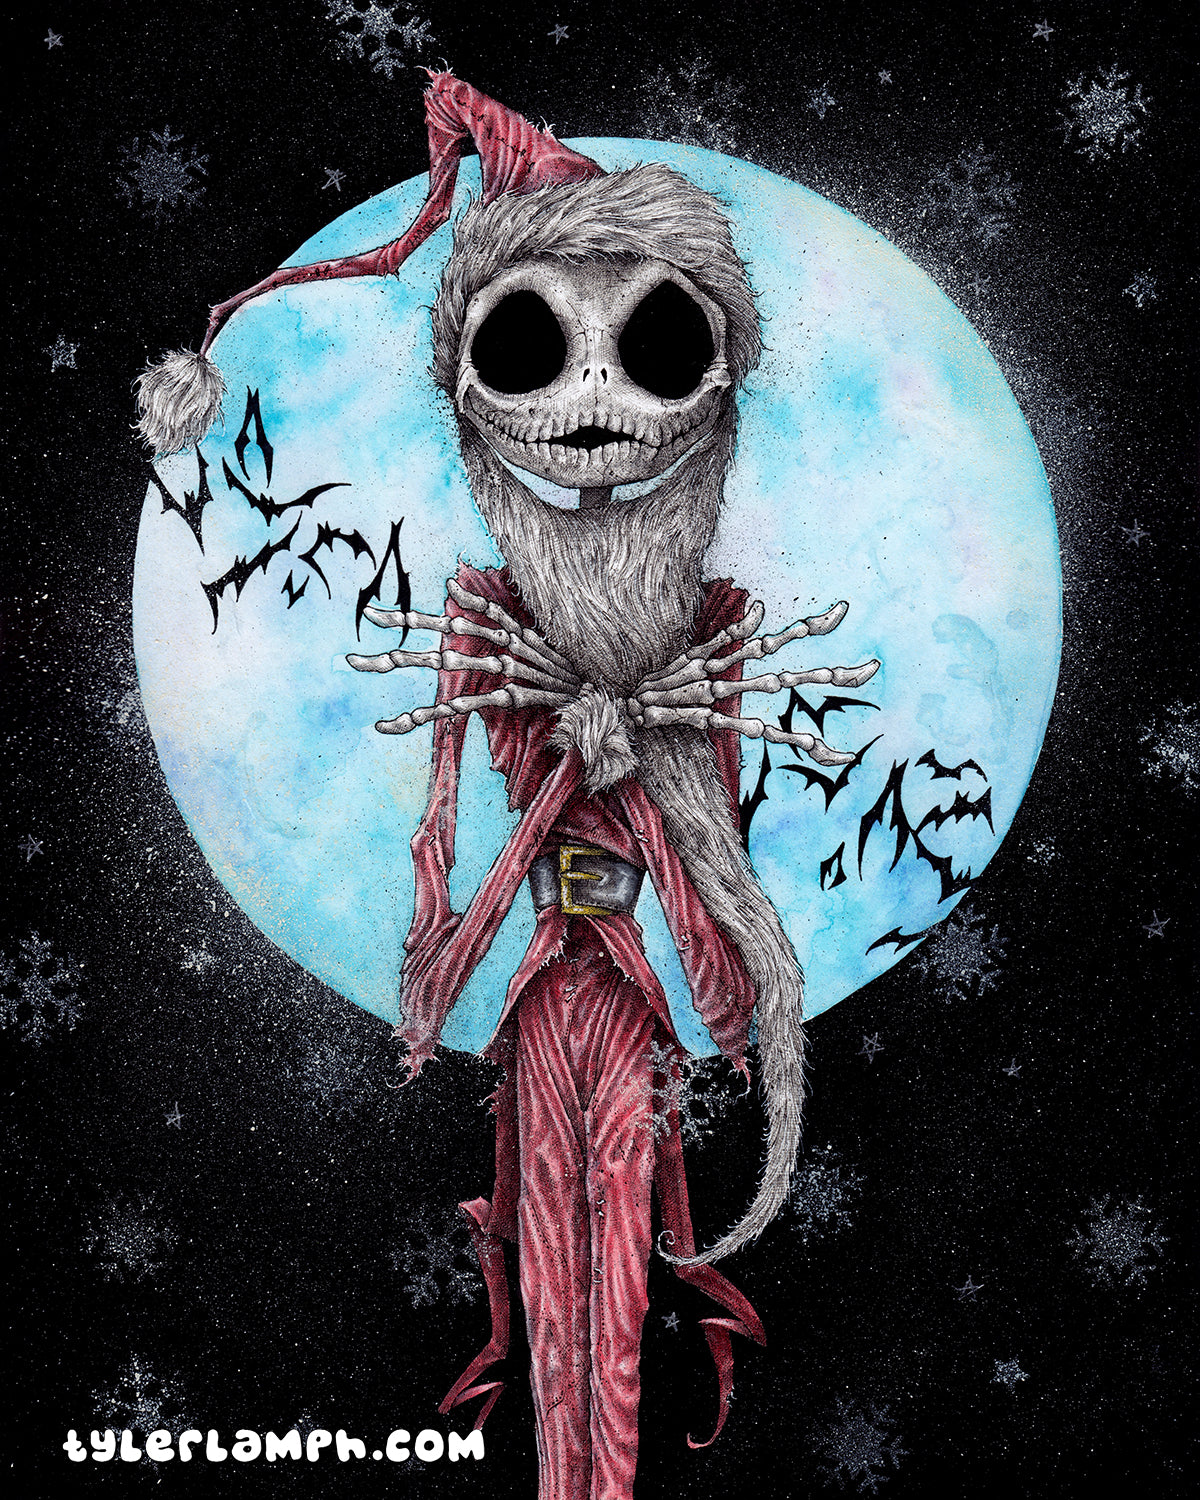 The Sandy Claws - 16"x20"